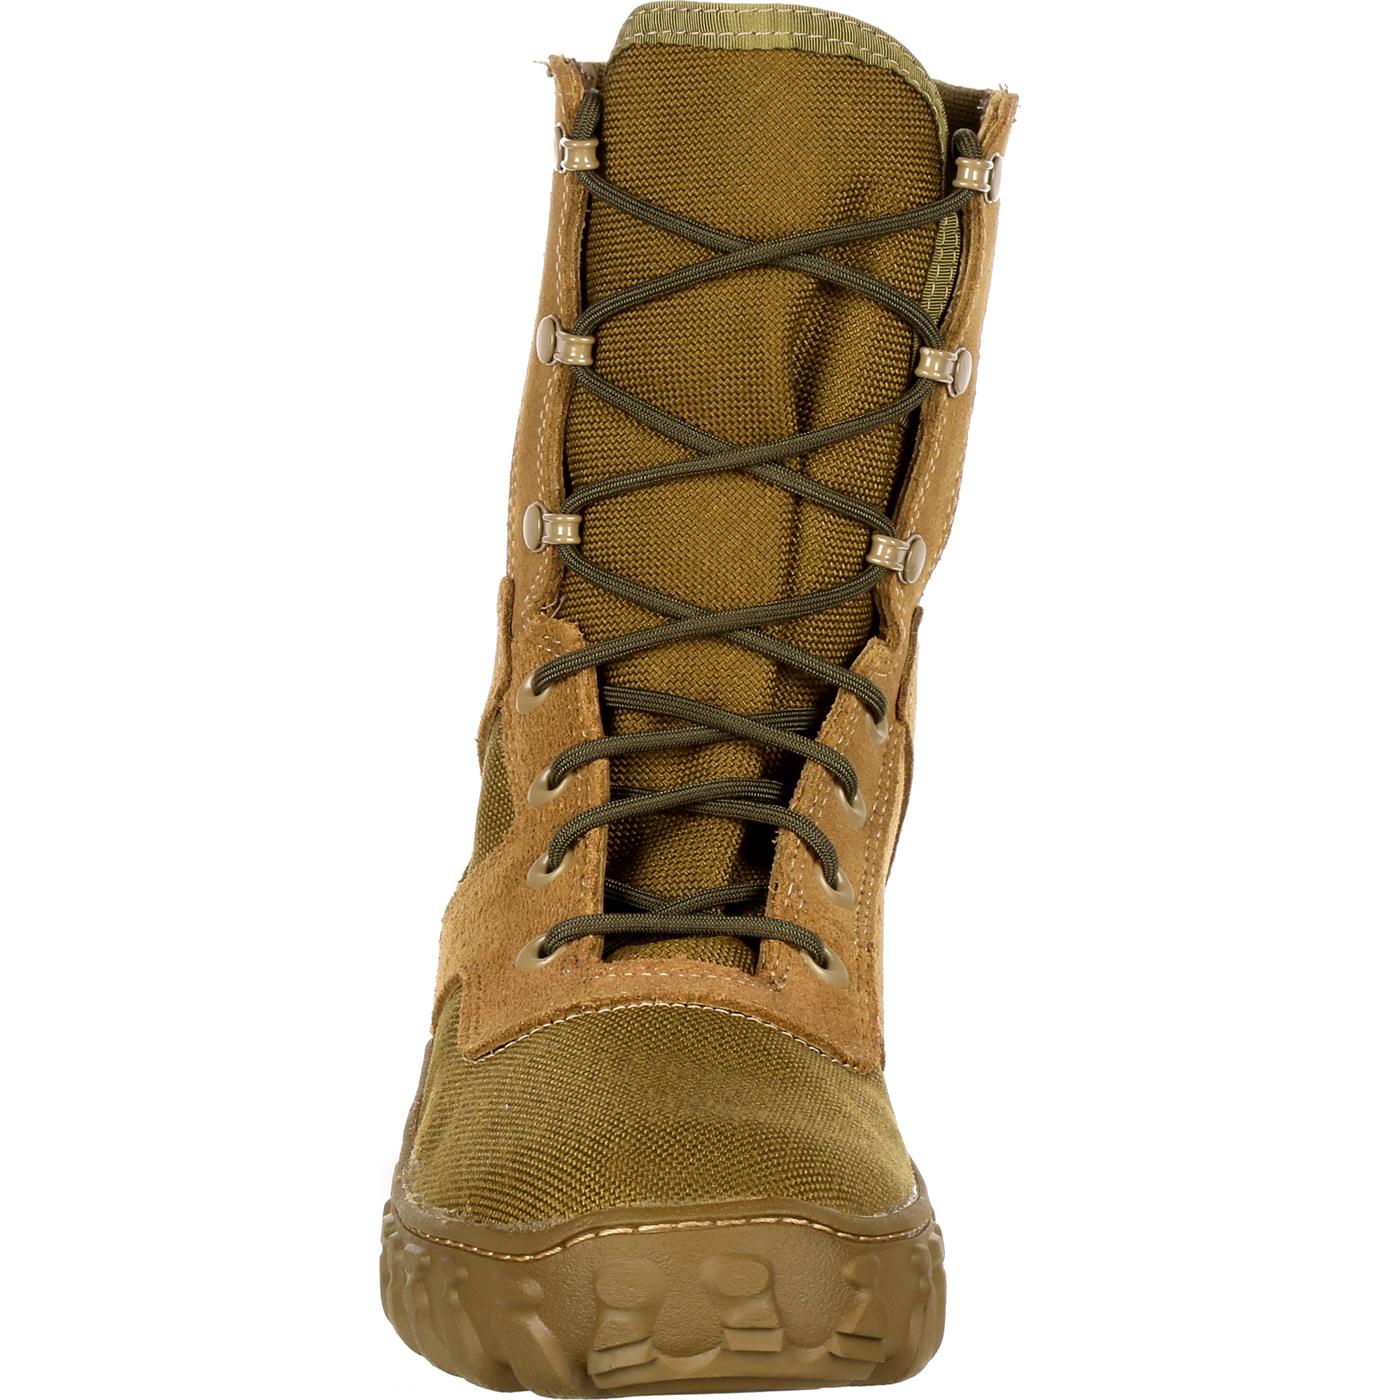 Rocky S2V Men's Military Jungle Boots, style #FQ0000106